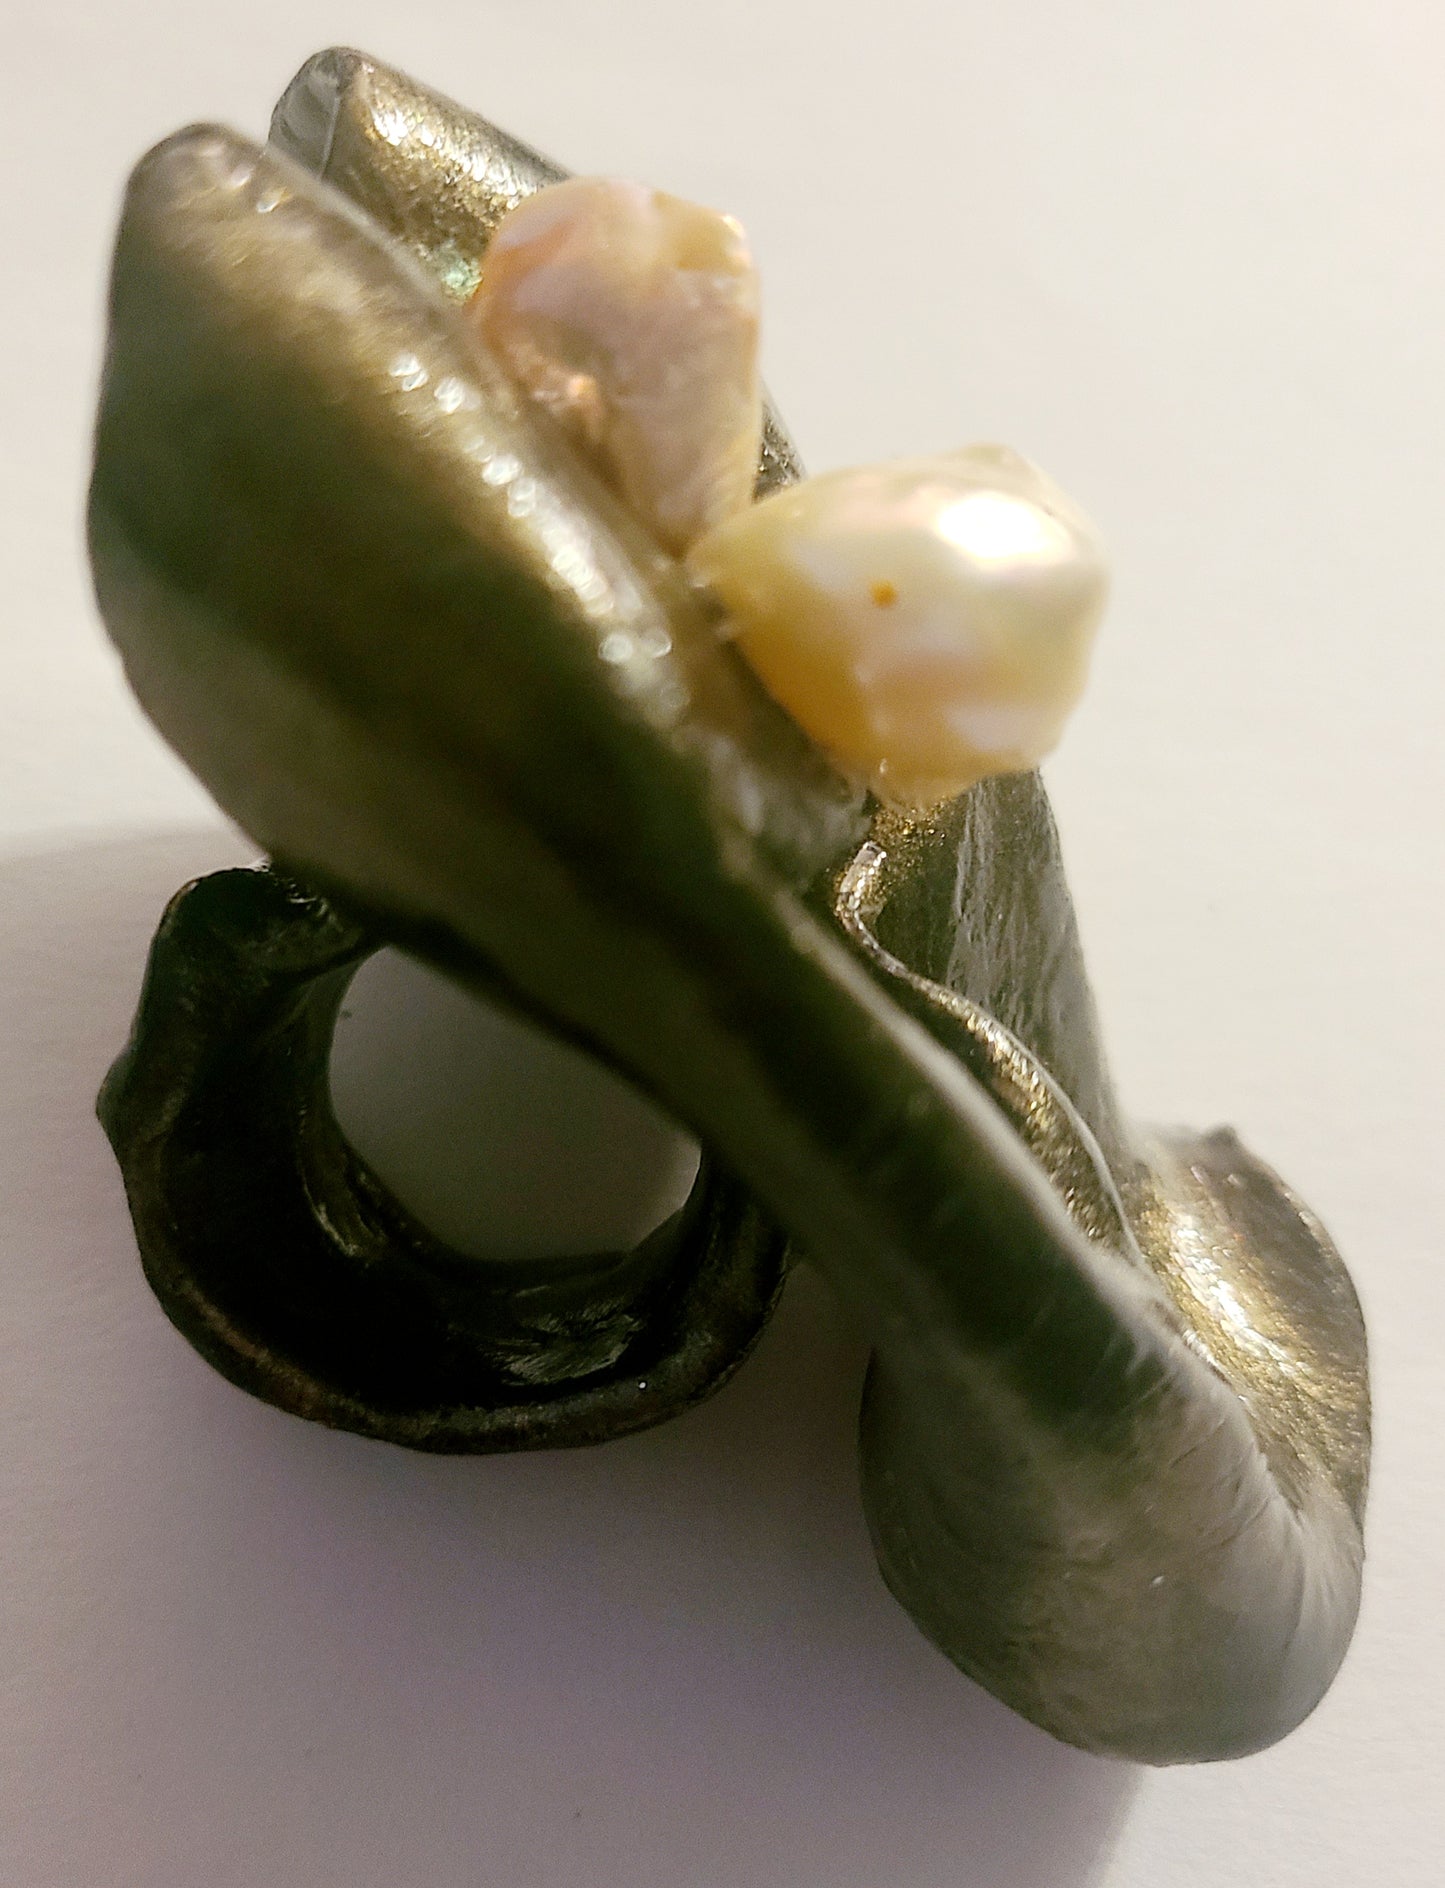 Hand Sculpted Freshwater Pearl Statement Ring Size 8-9, Bronze Metallic Sensuous Finger Candy, OOAK Wearable Art Cocktail Ring